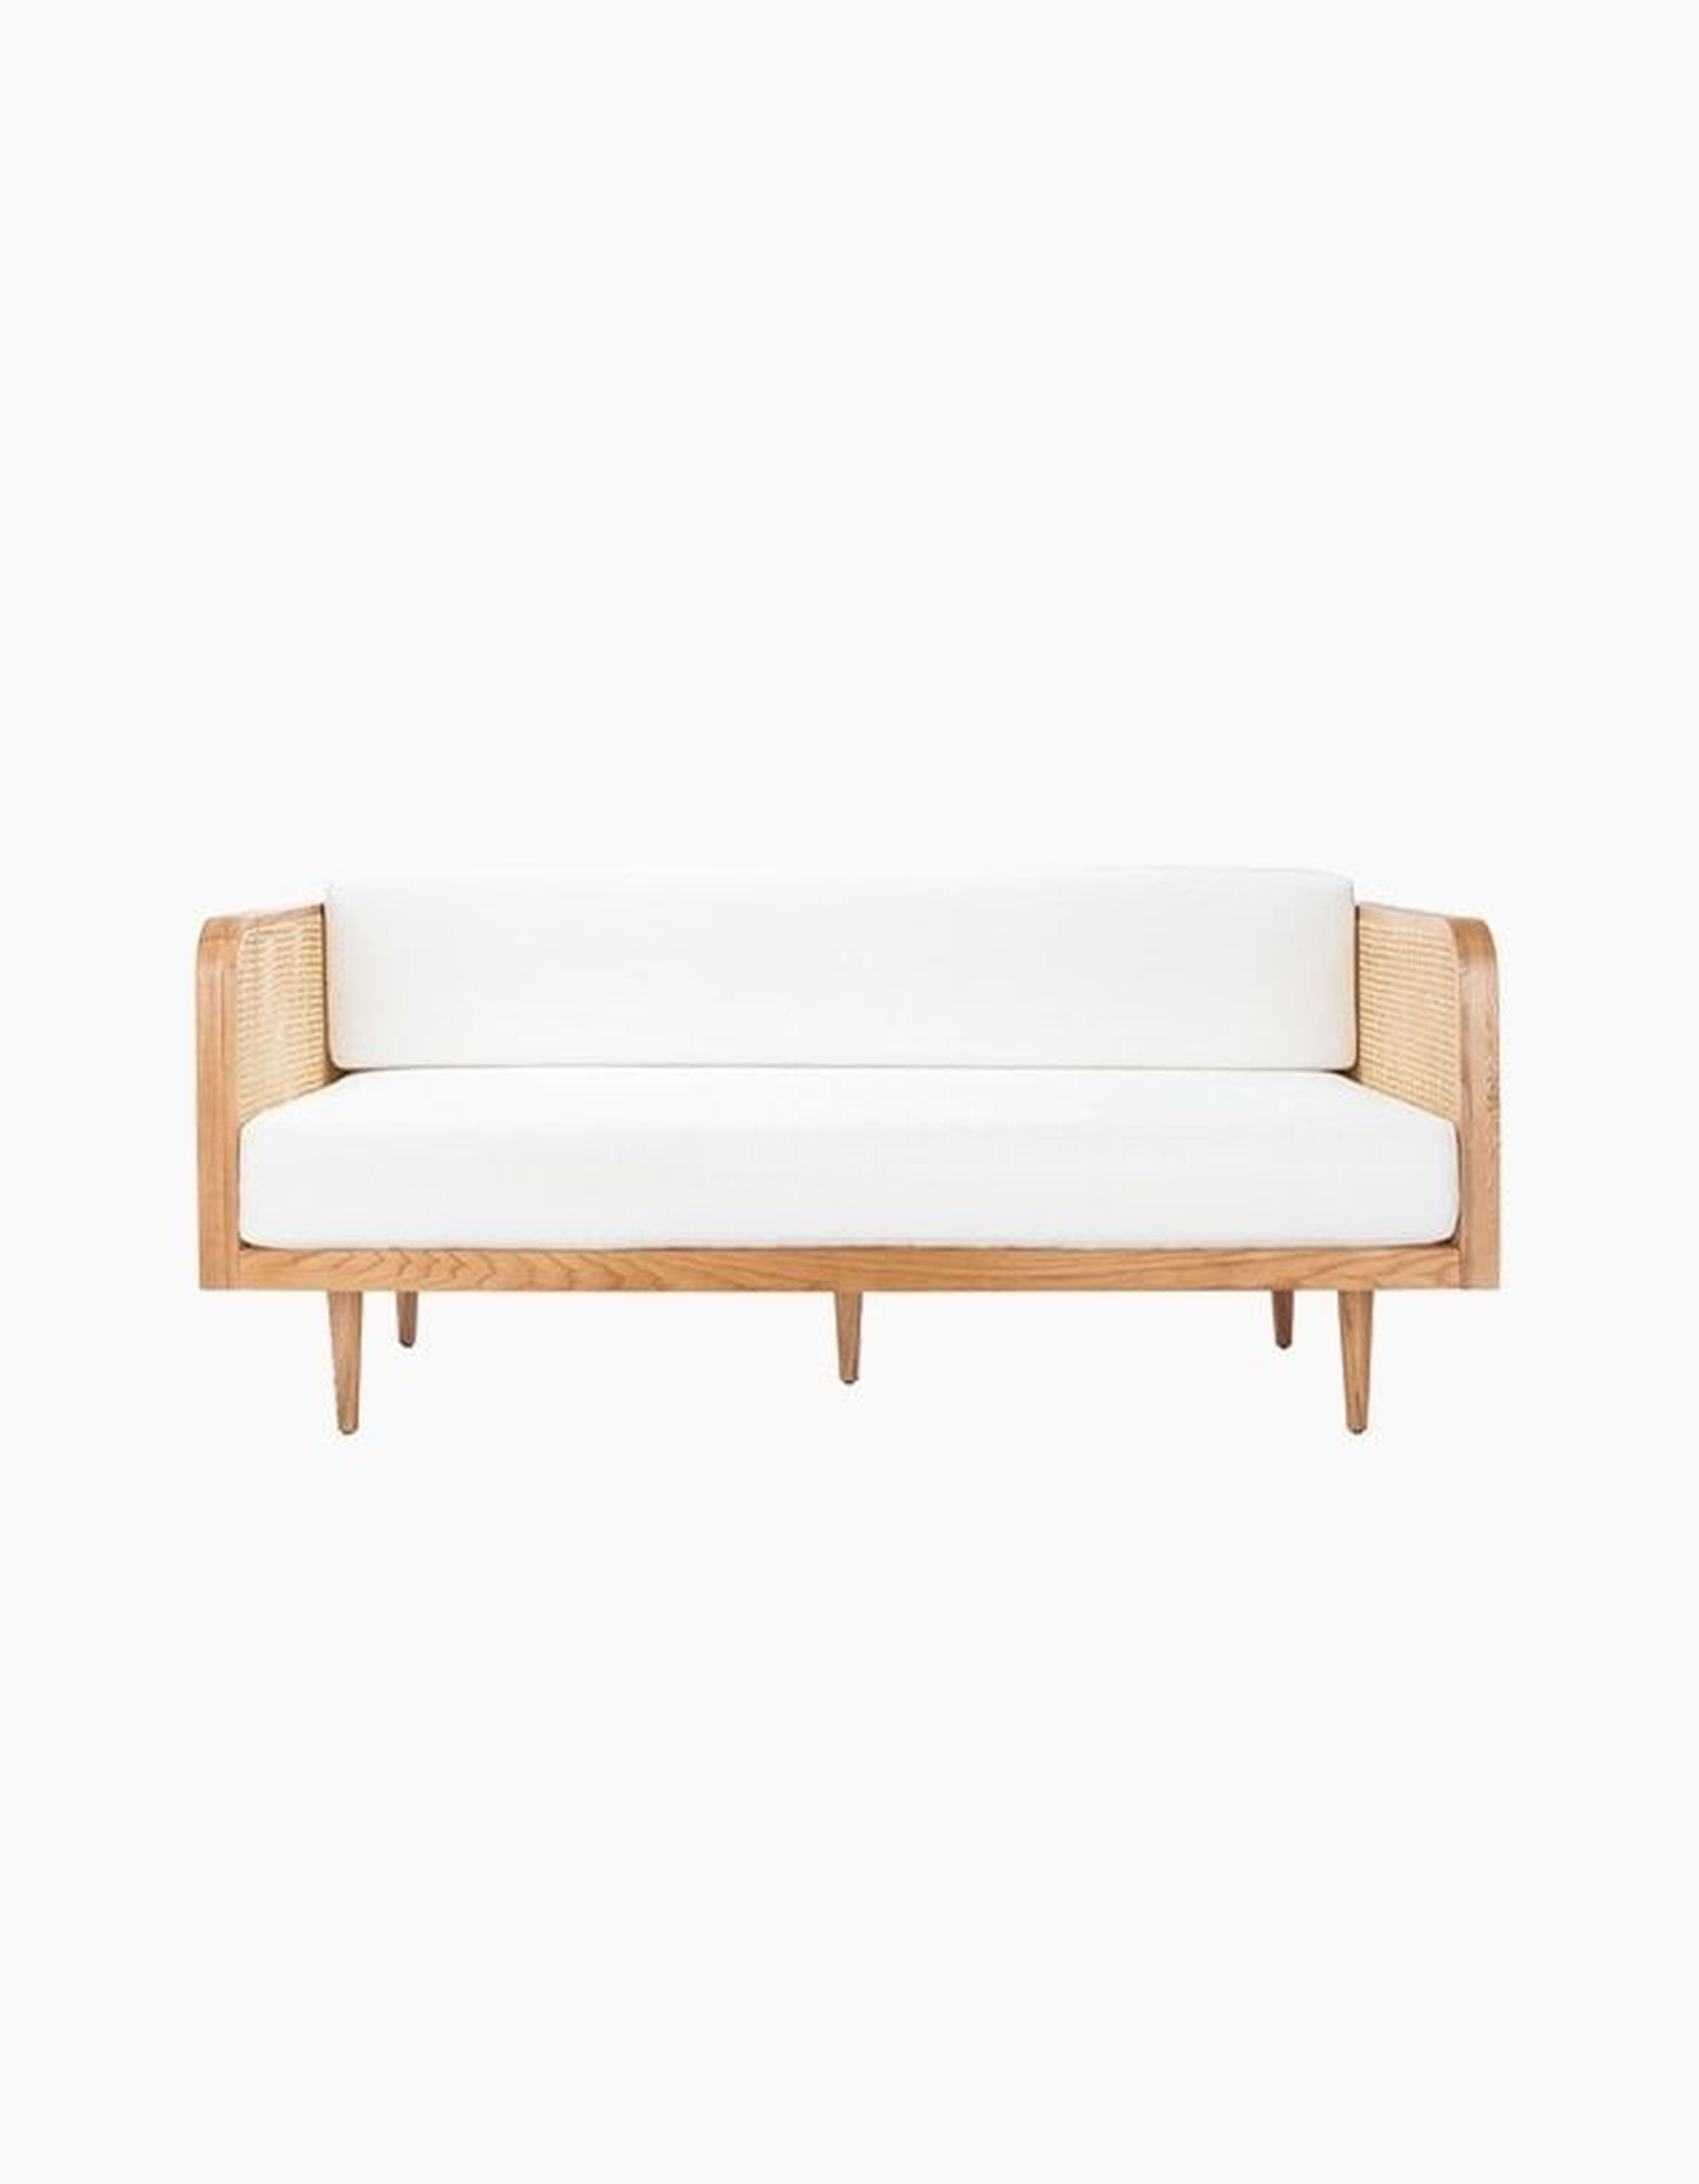 Fillmore Cane Daybed, Ivory Linen - Roam Common